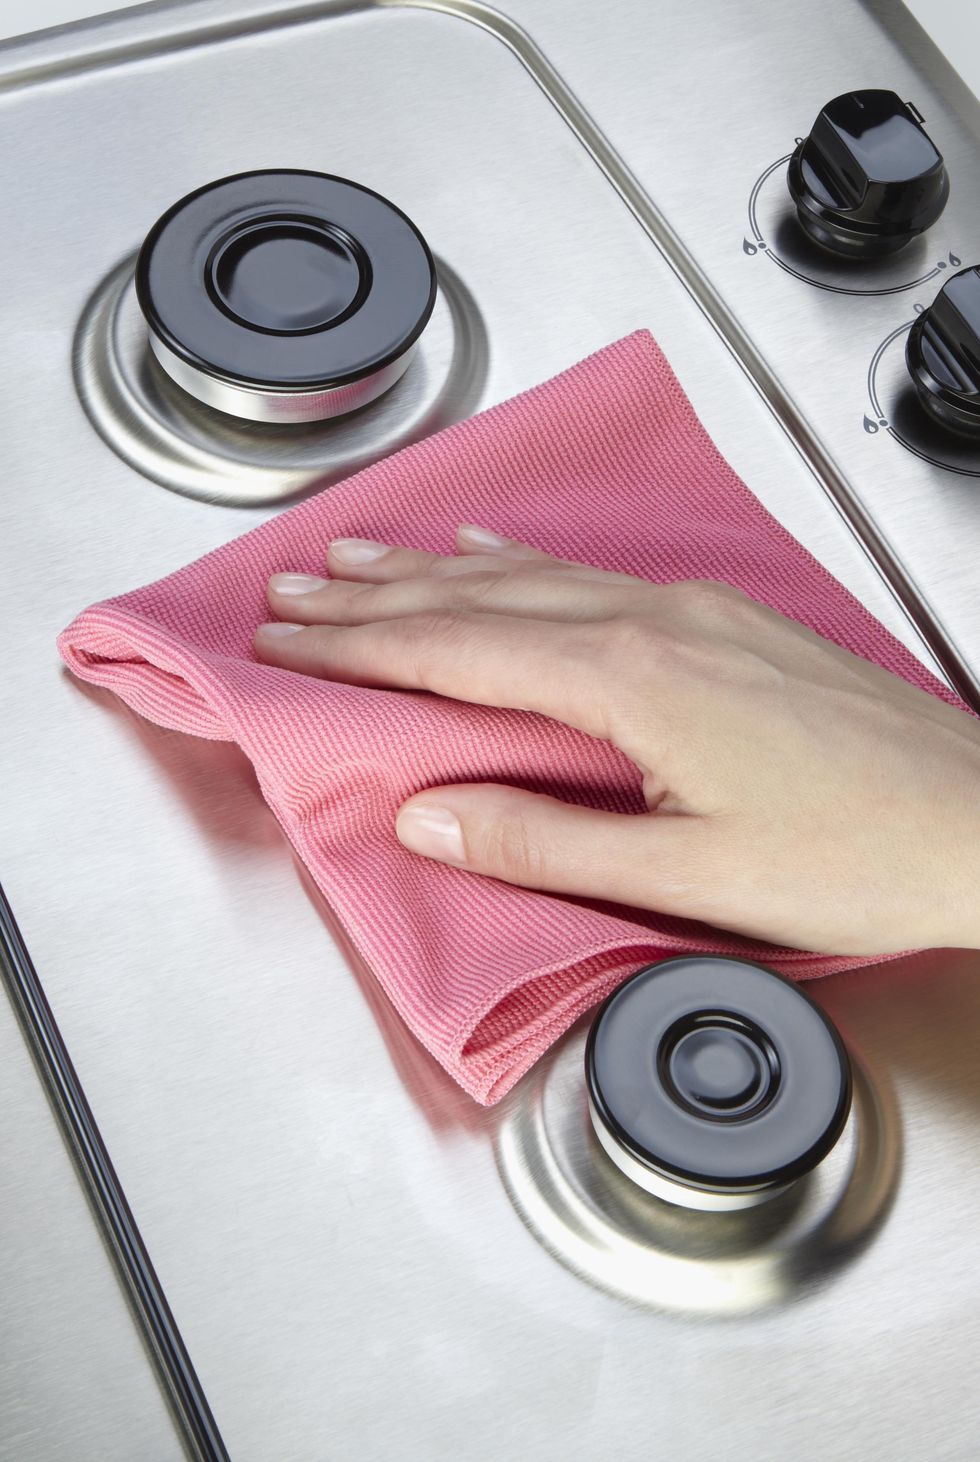 pink cloth cleaning stainless steel stovetop